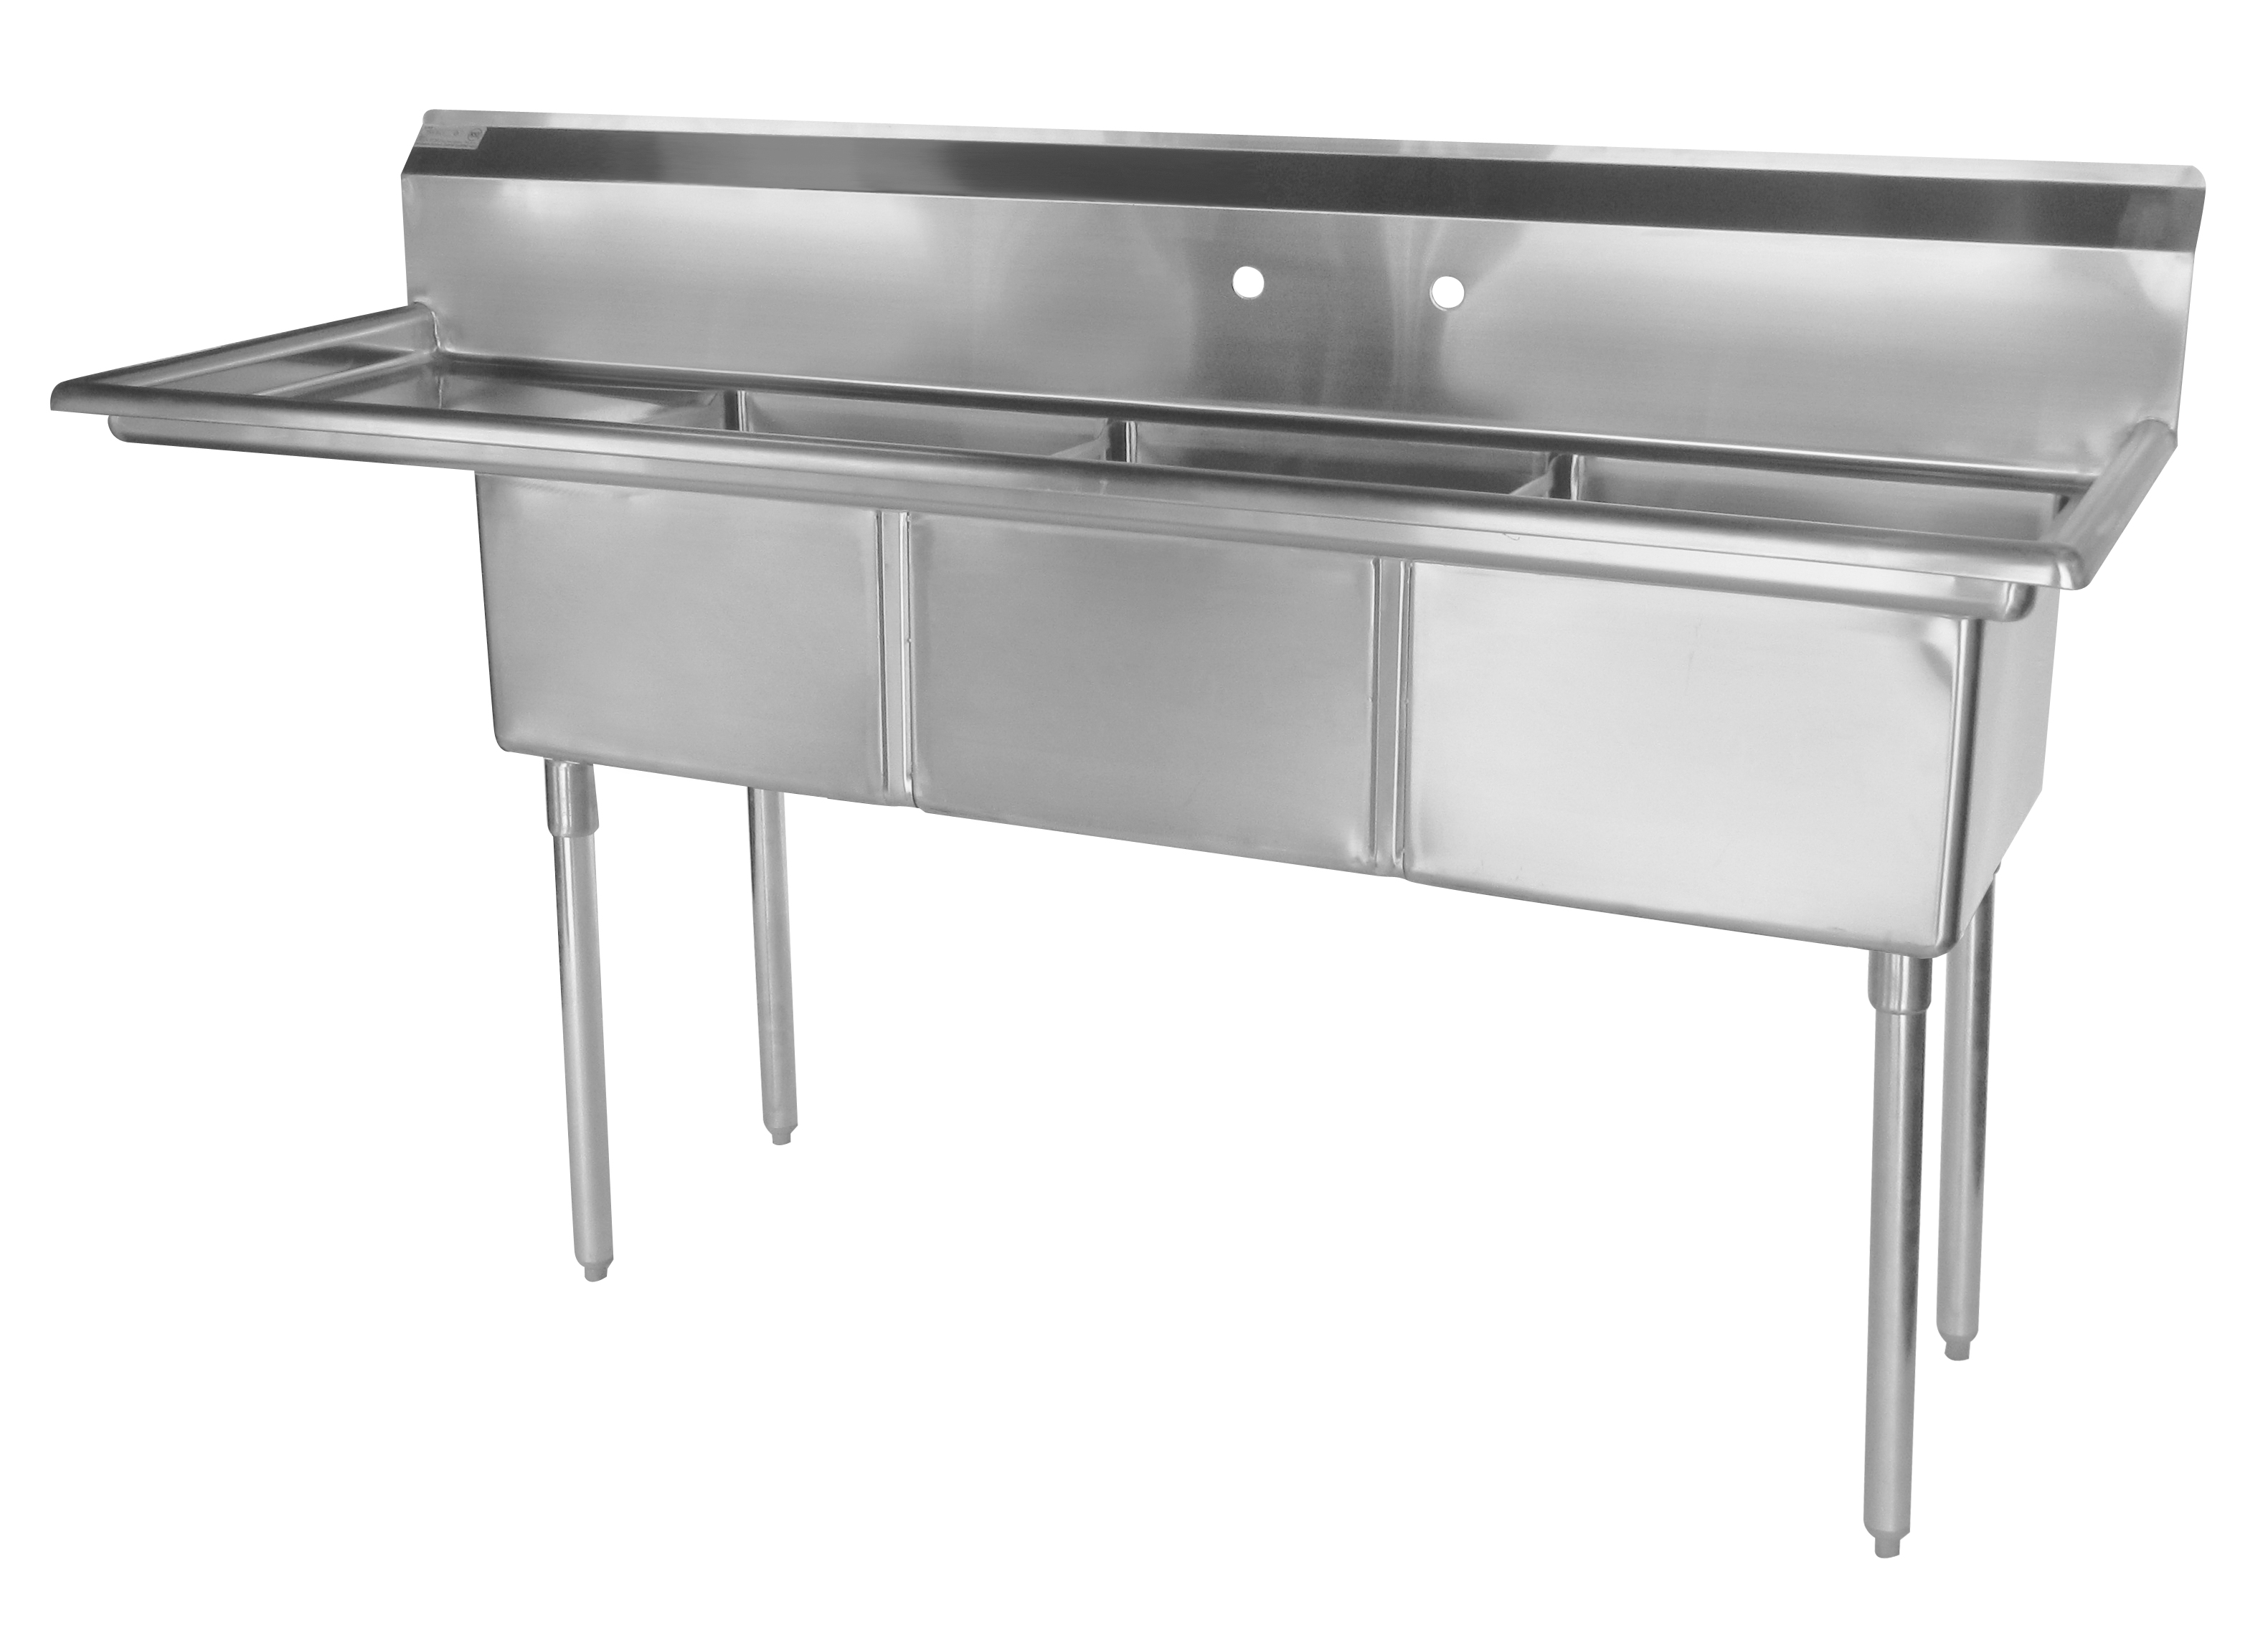 Sink, Three Compartment, with left 18" drainboard